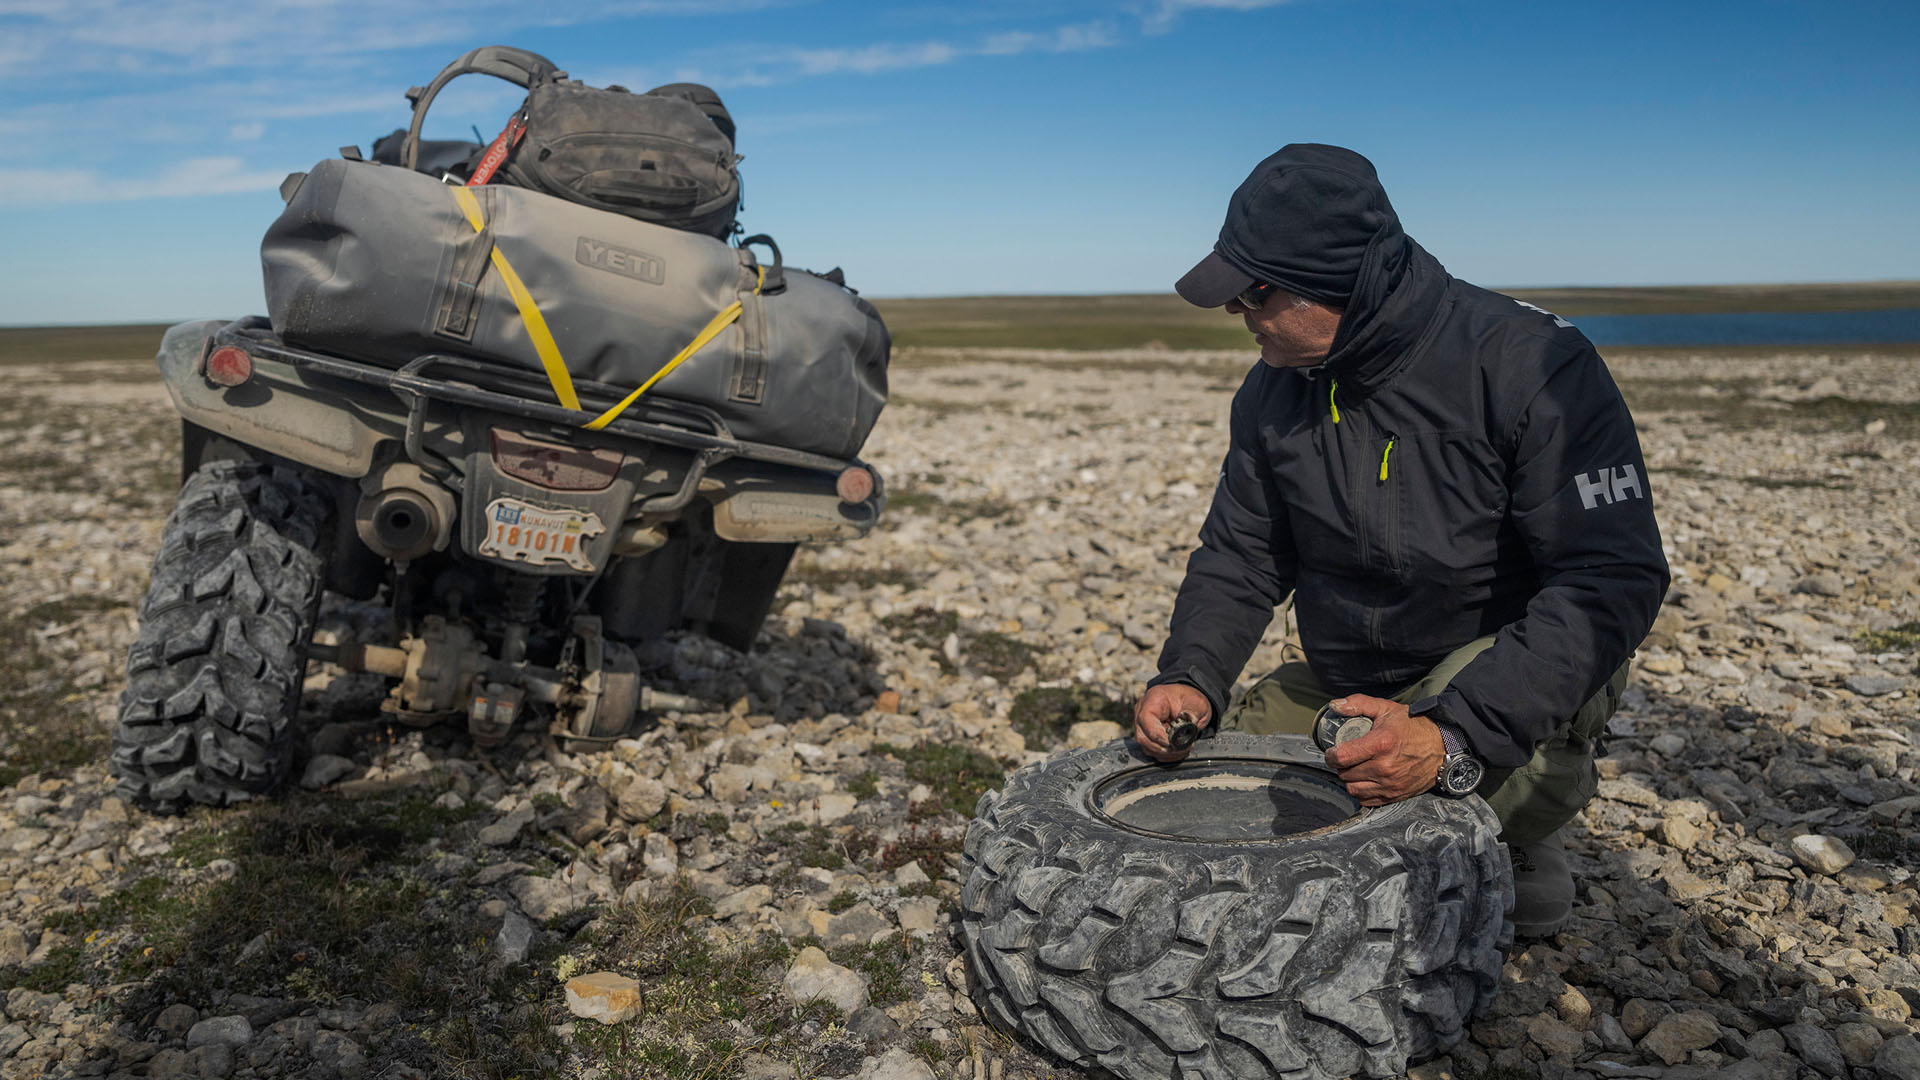 Franklin historian Tom Gross fixes a broken tire on one of the ATVs during the journey in search... [Photo of the day - December 2023]